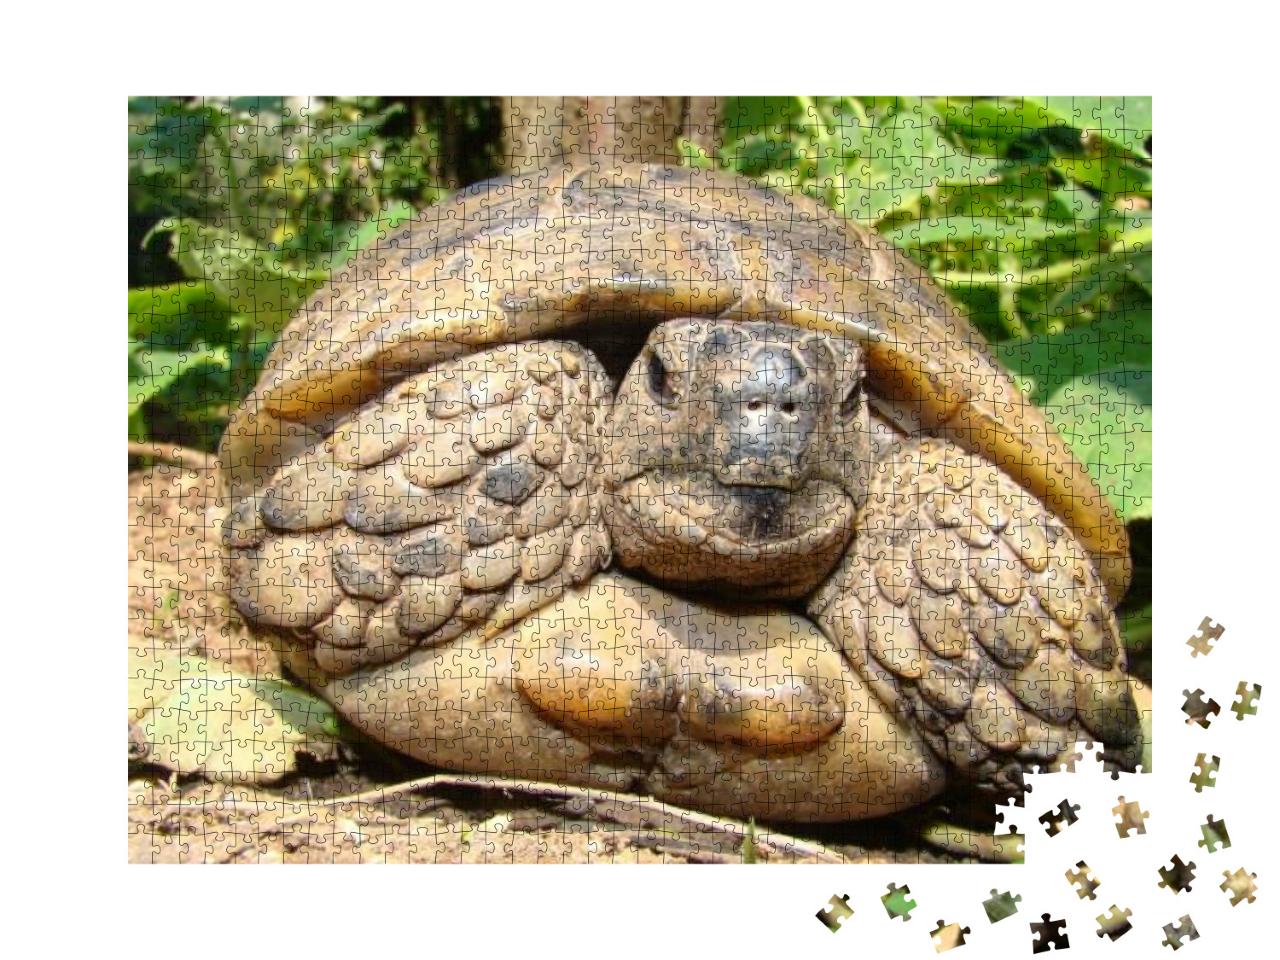 Tortoise Close Up. Tortoise Hiding in Shell in Nature, Tu... Jigsaw Puzzle with 1000 pieces